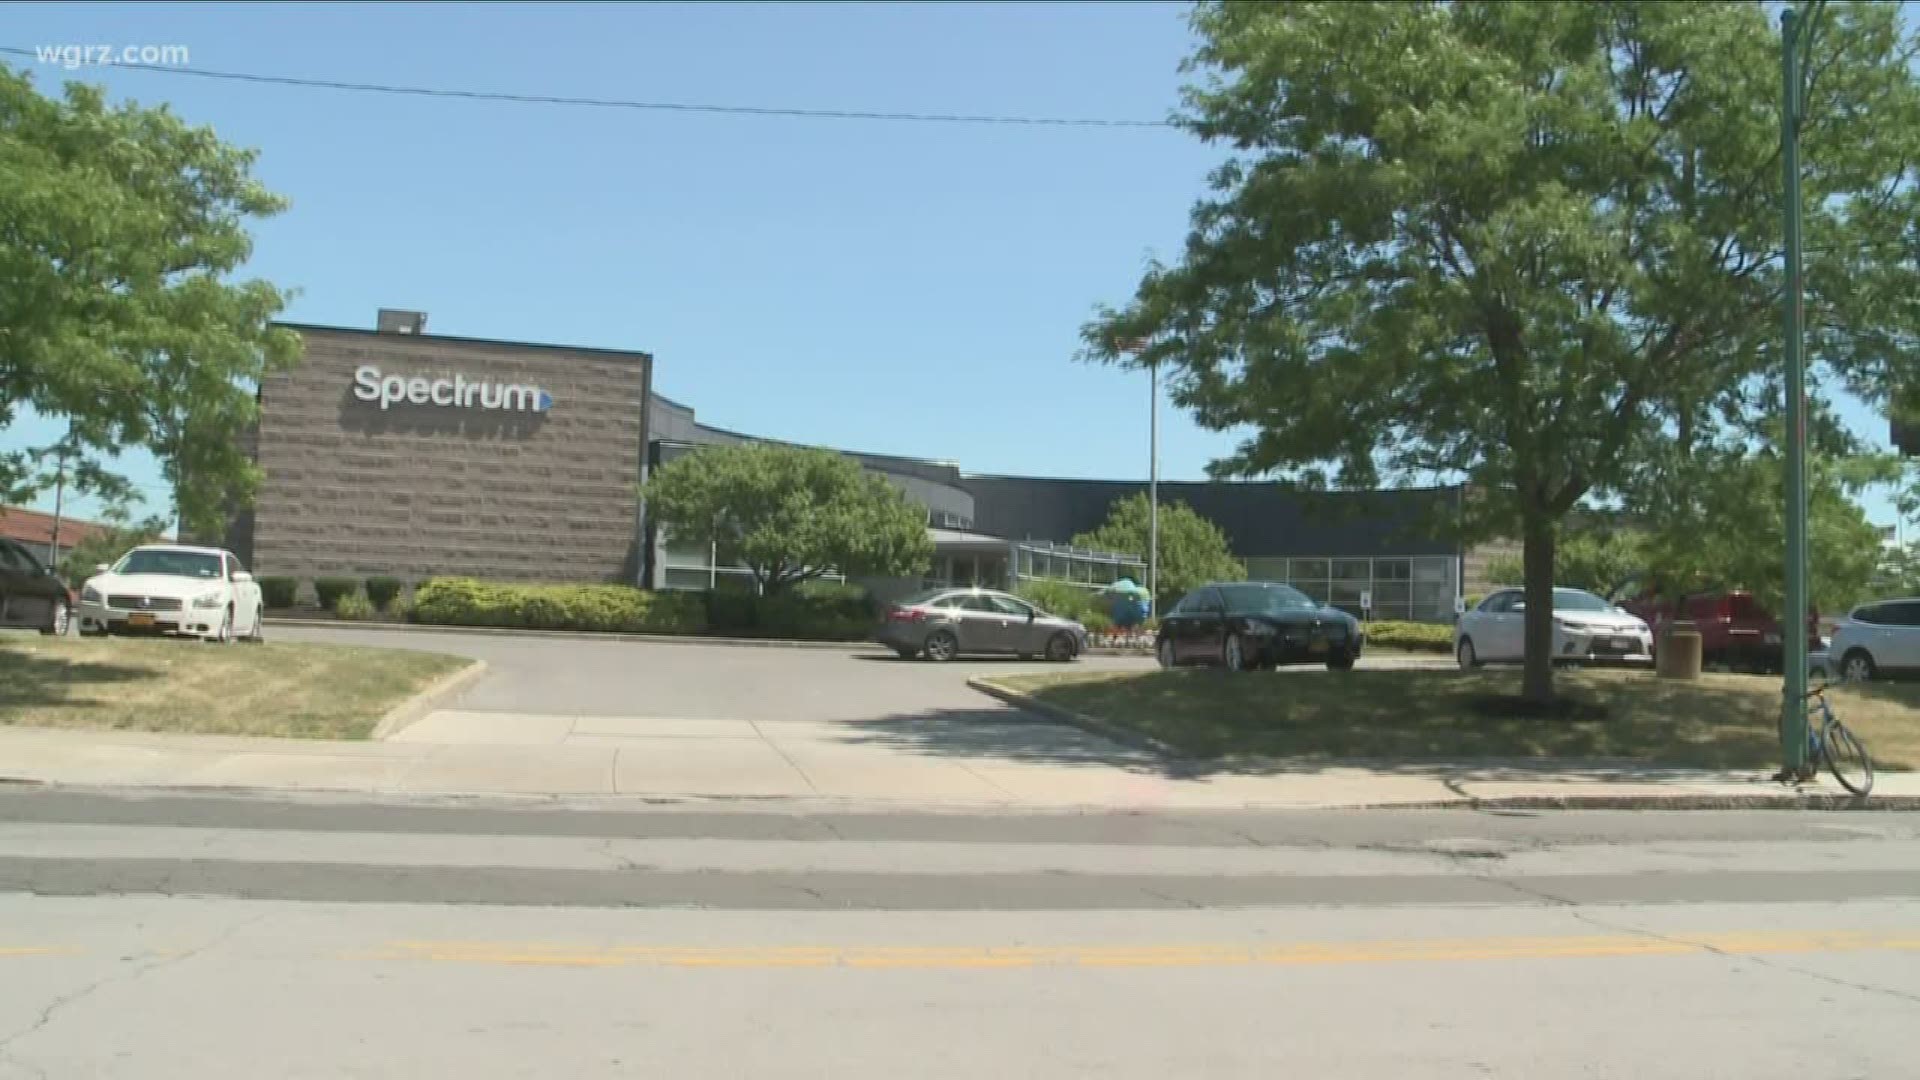 Charter Spectrum to stay in New York state